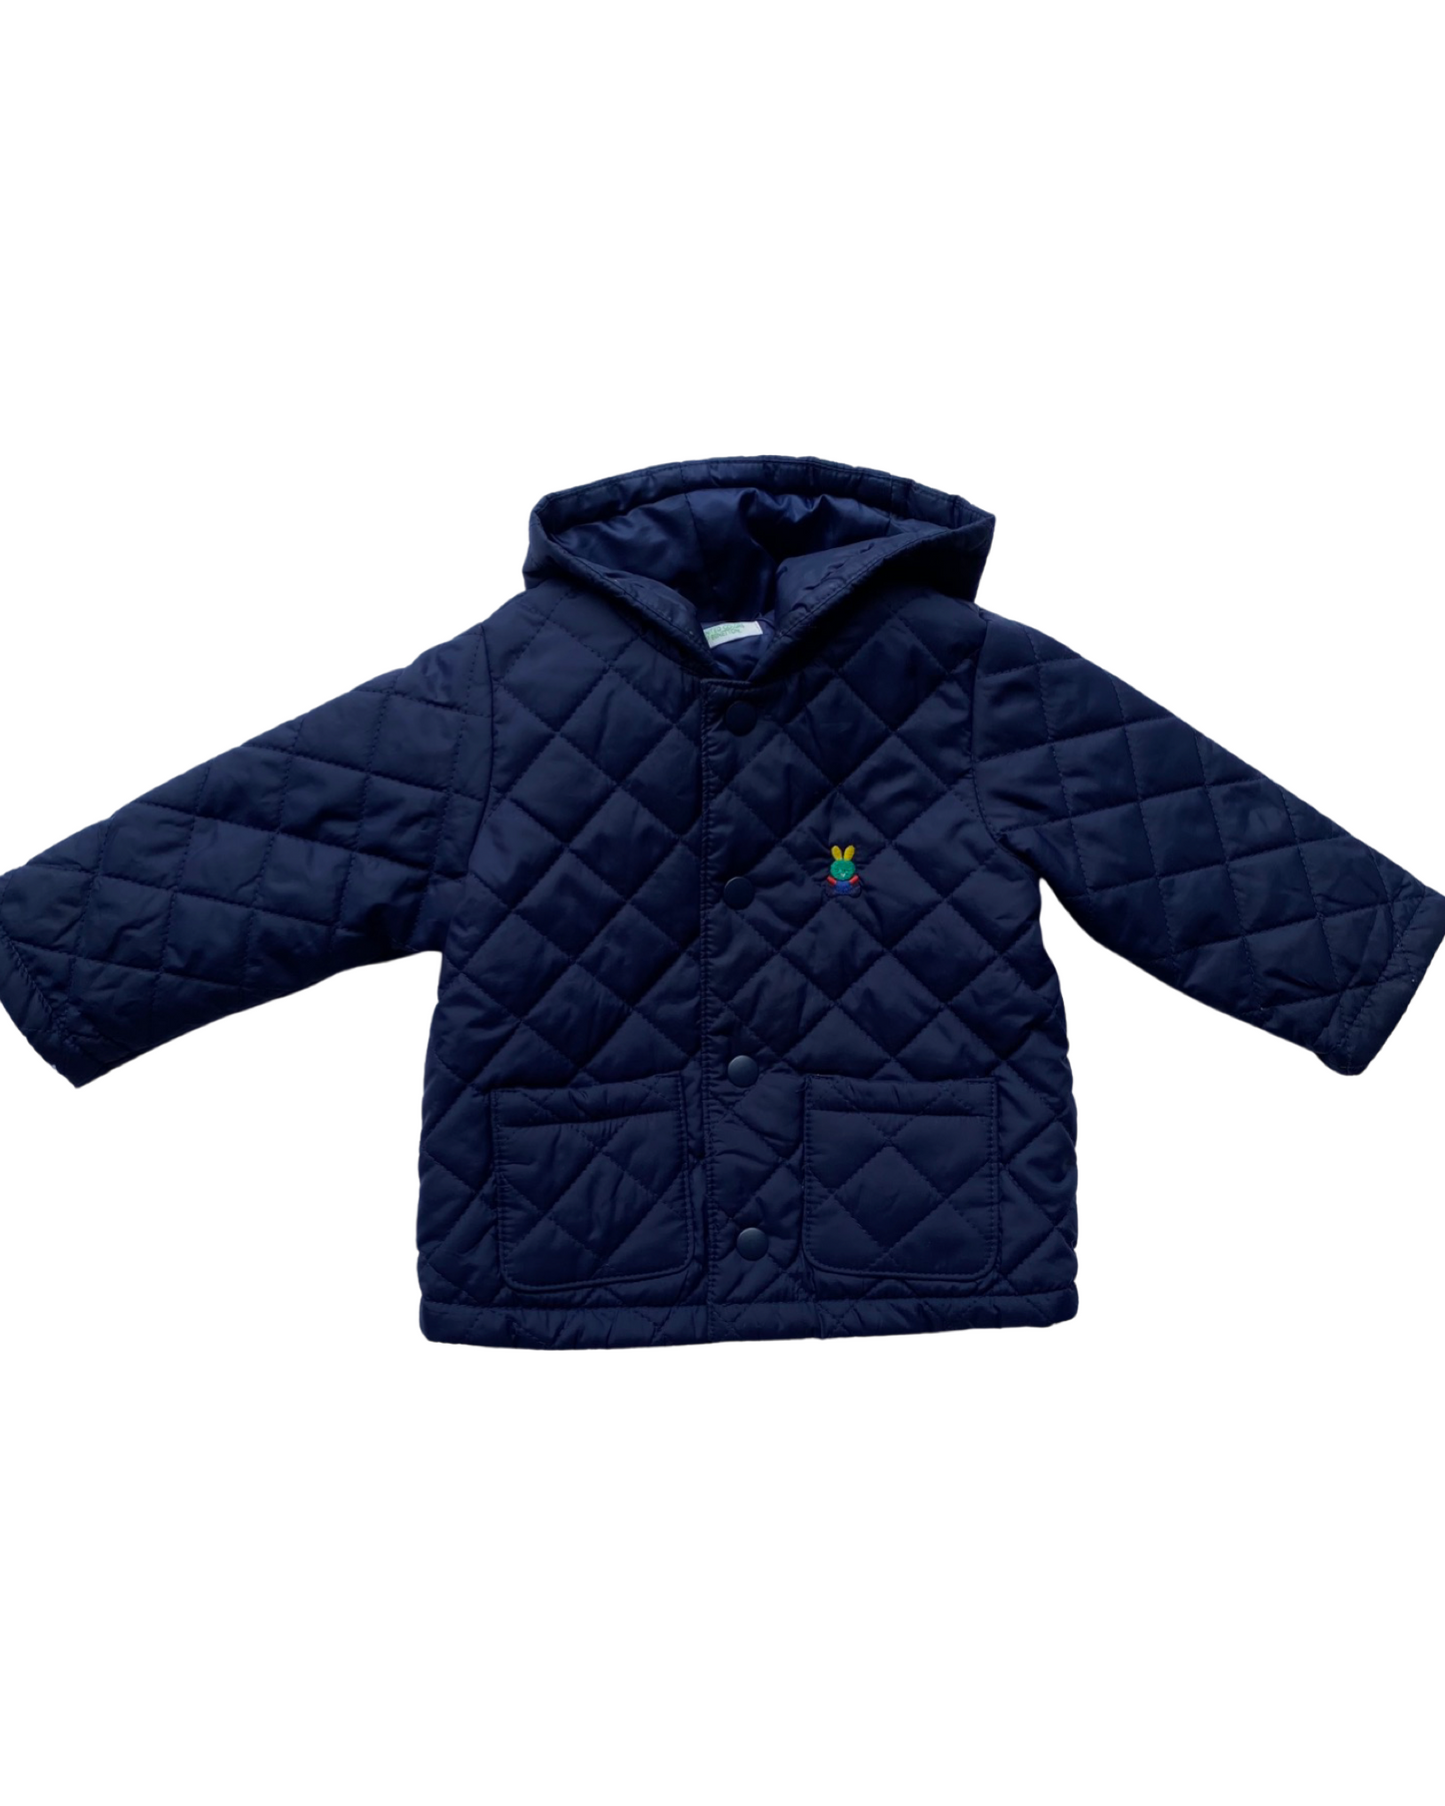 United Colours of Benetton quilted navy jacket (6-9mths)